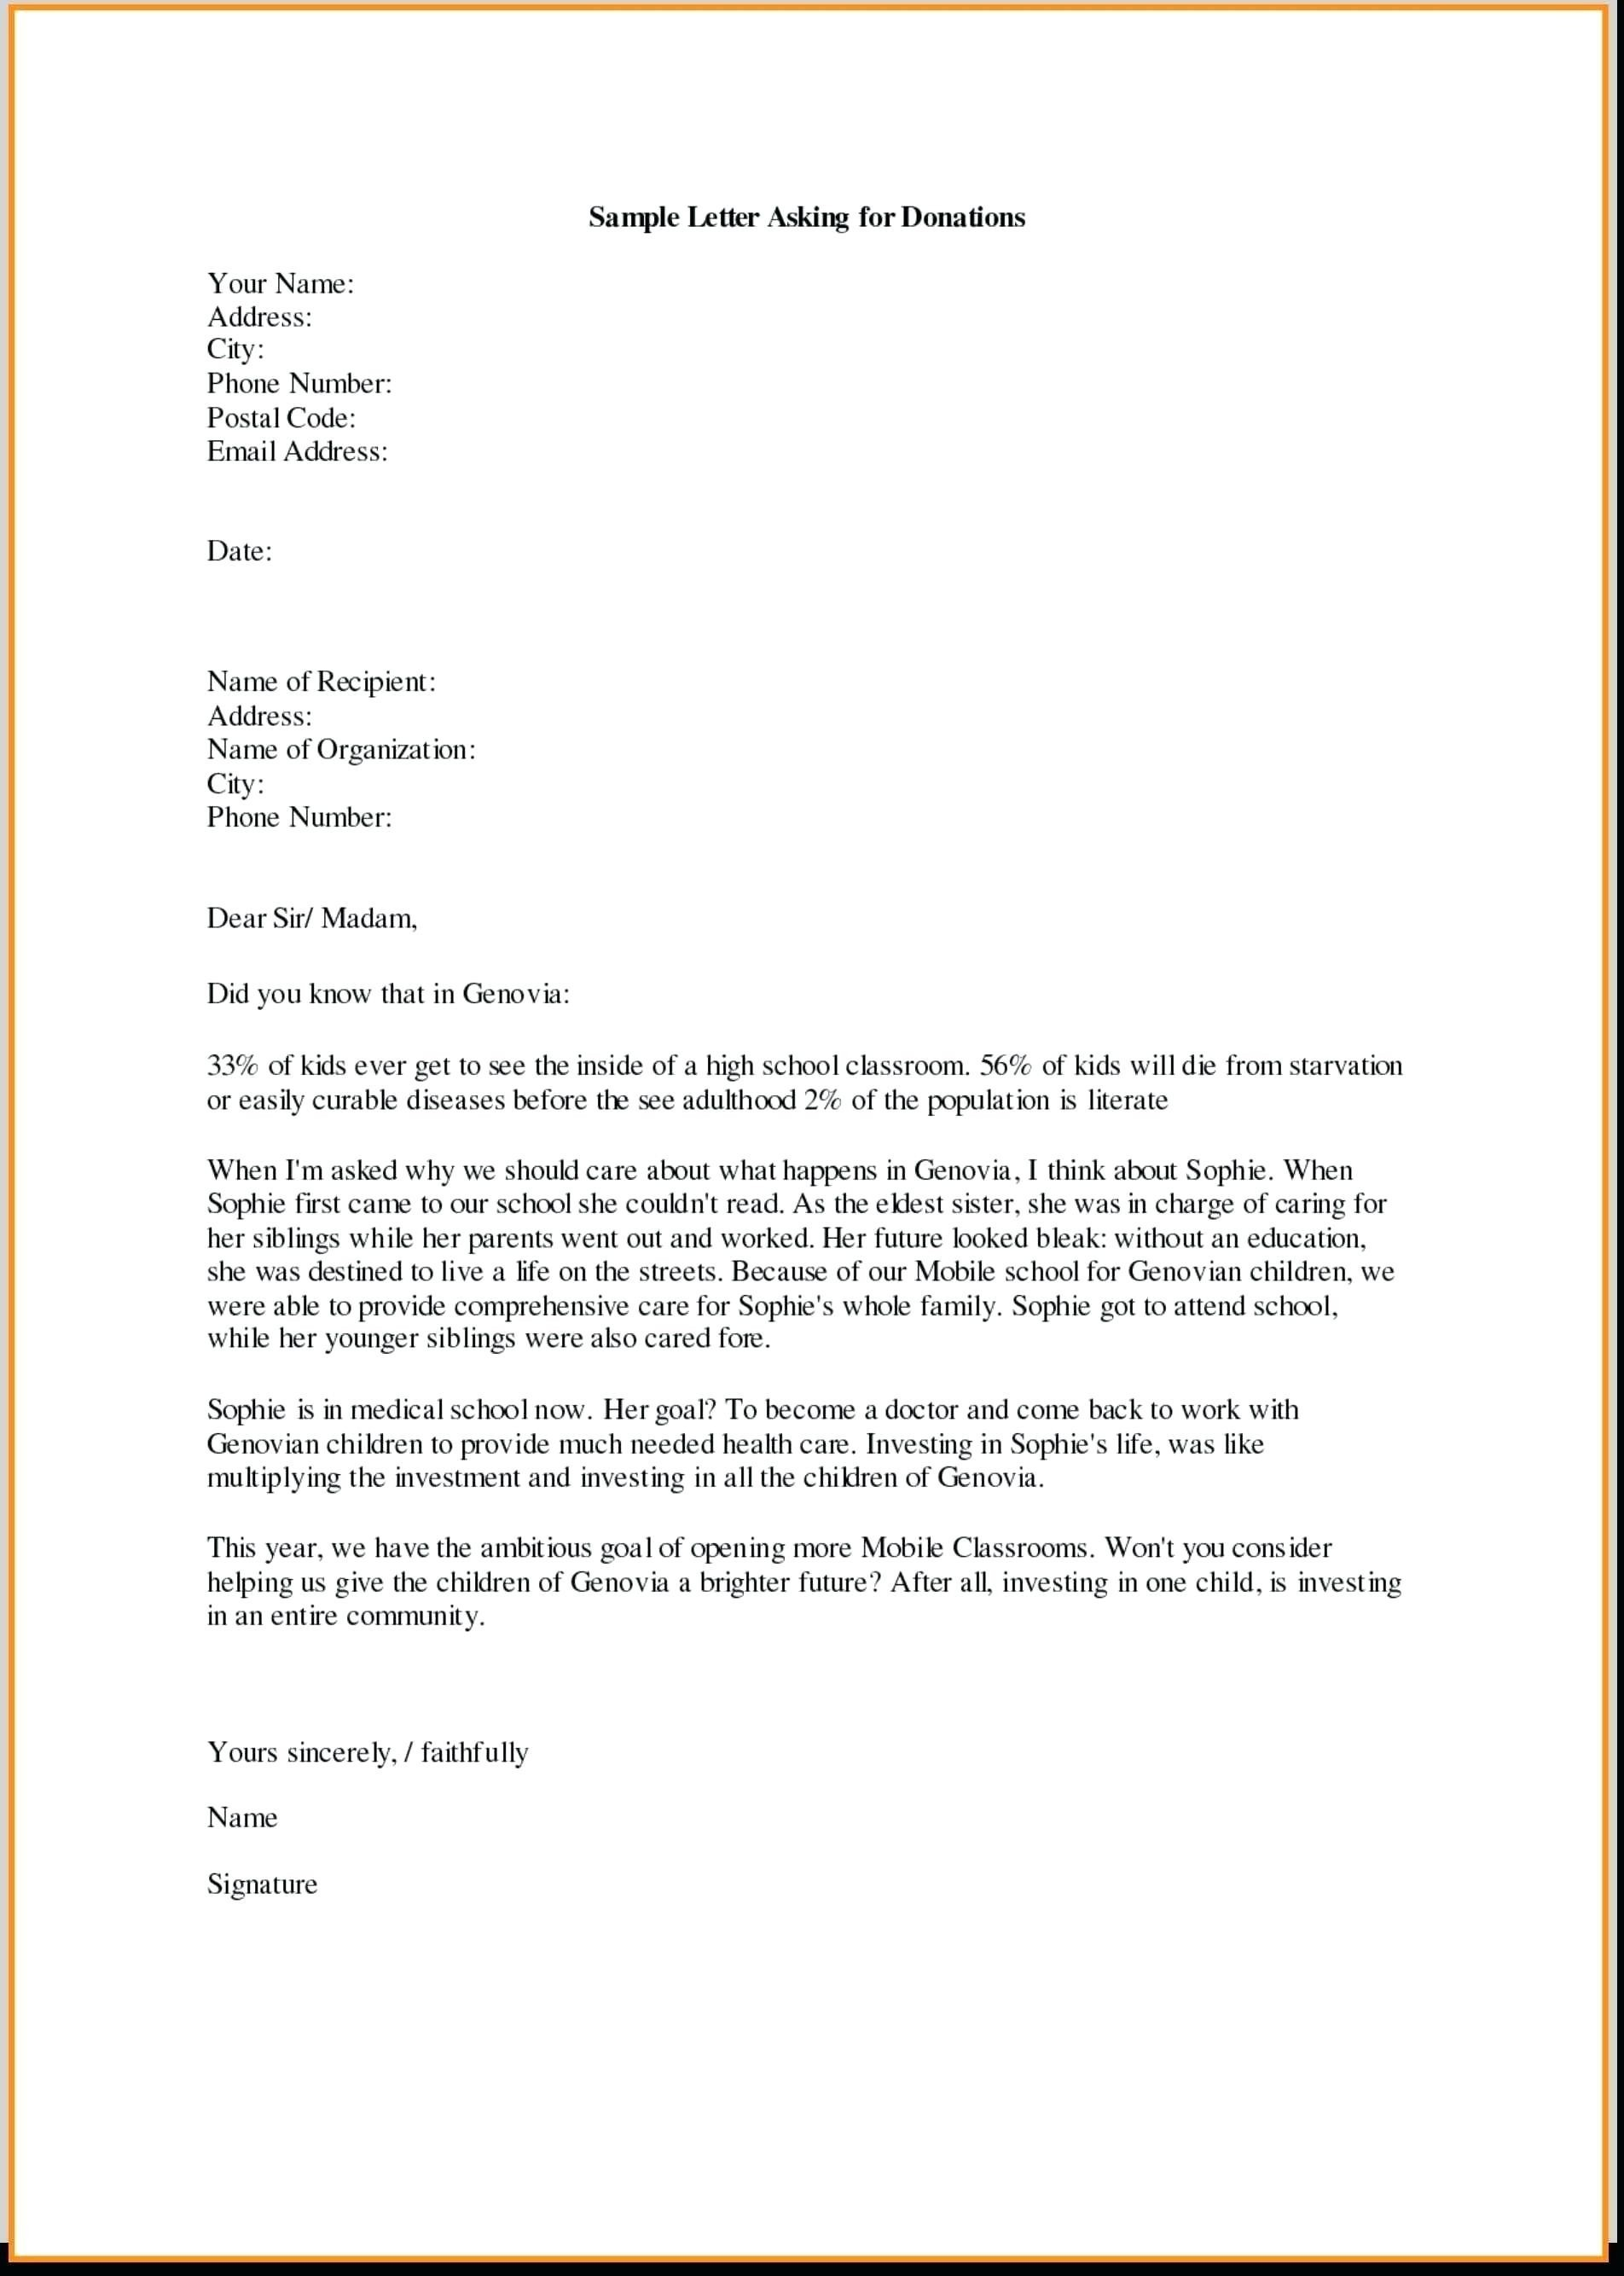 Food Donation Letter Template - Samples Letters Request Donation Best Samples Letters Request